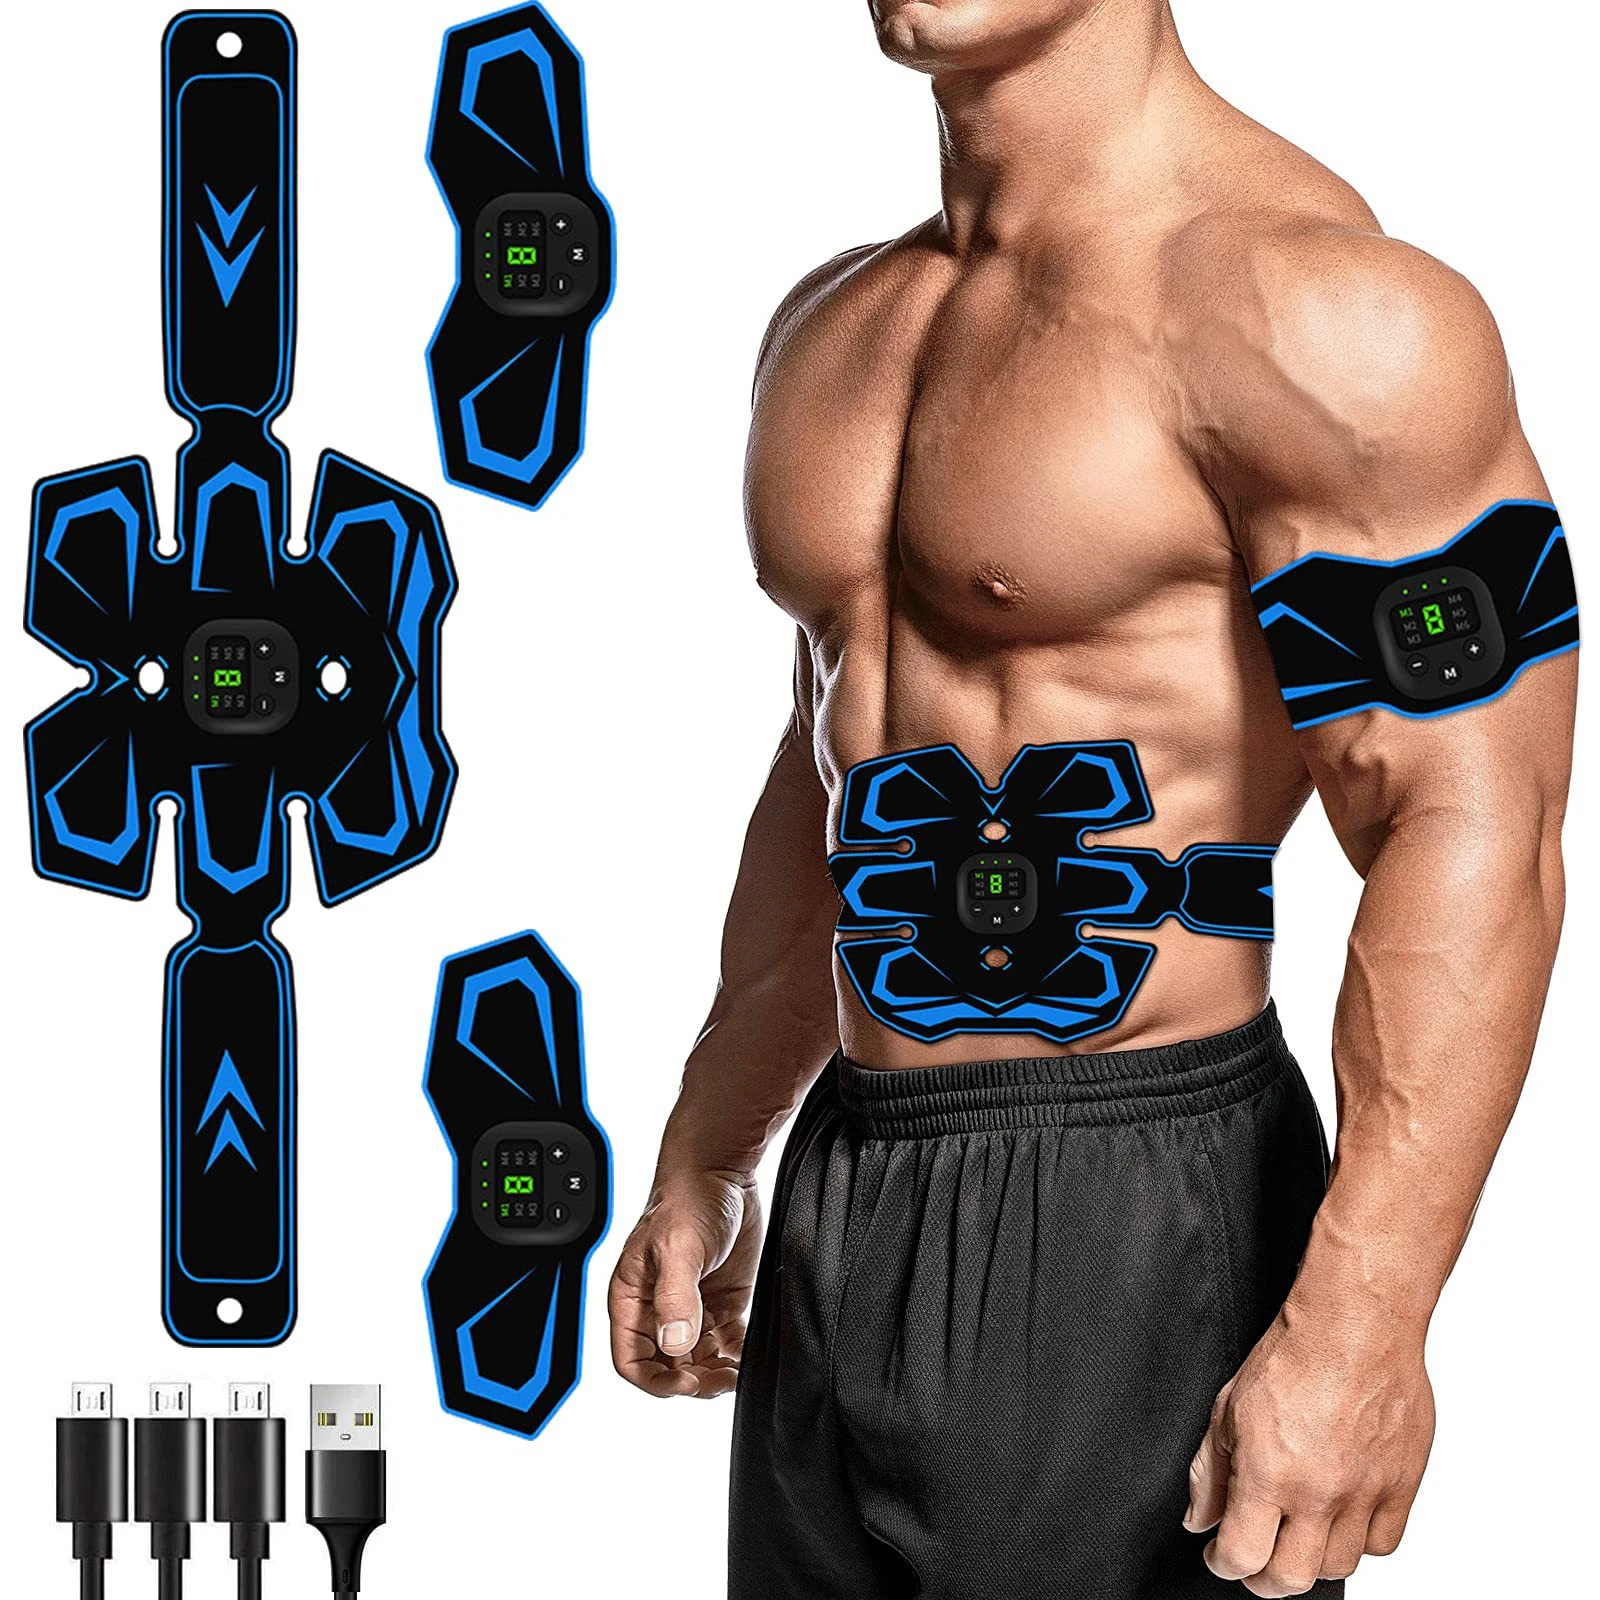 Rechargeable Abdominal Muscle Trainer Fitness EMS Control Smart Body Building 